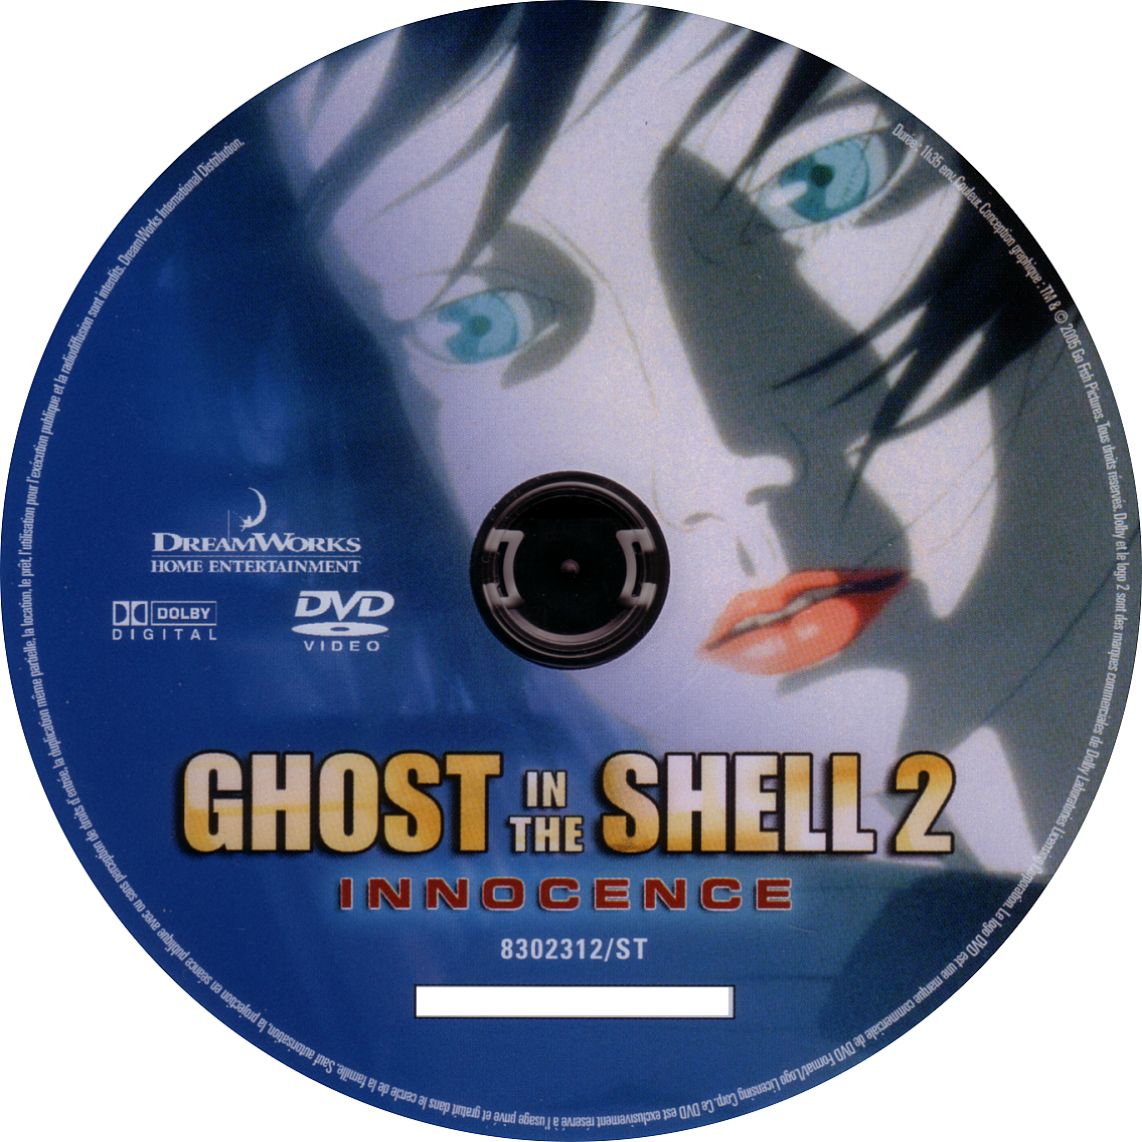 Ghost in the shell 2 Innocence